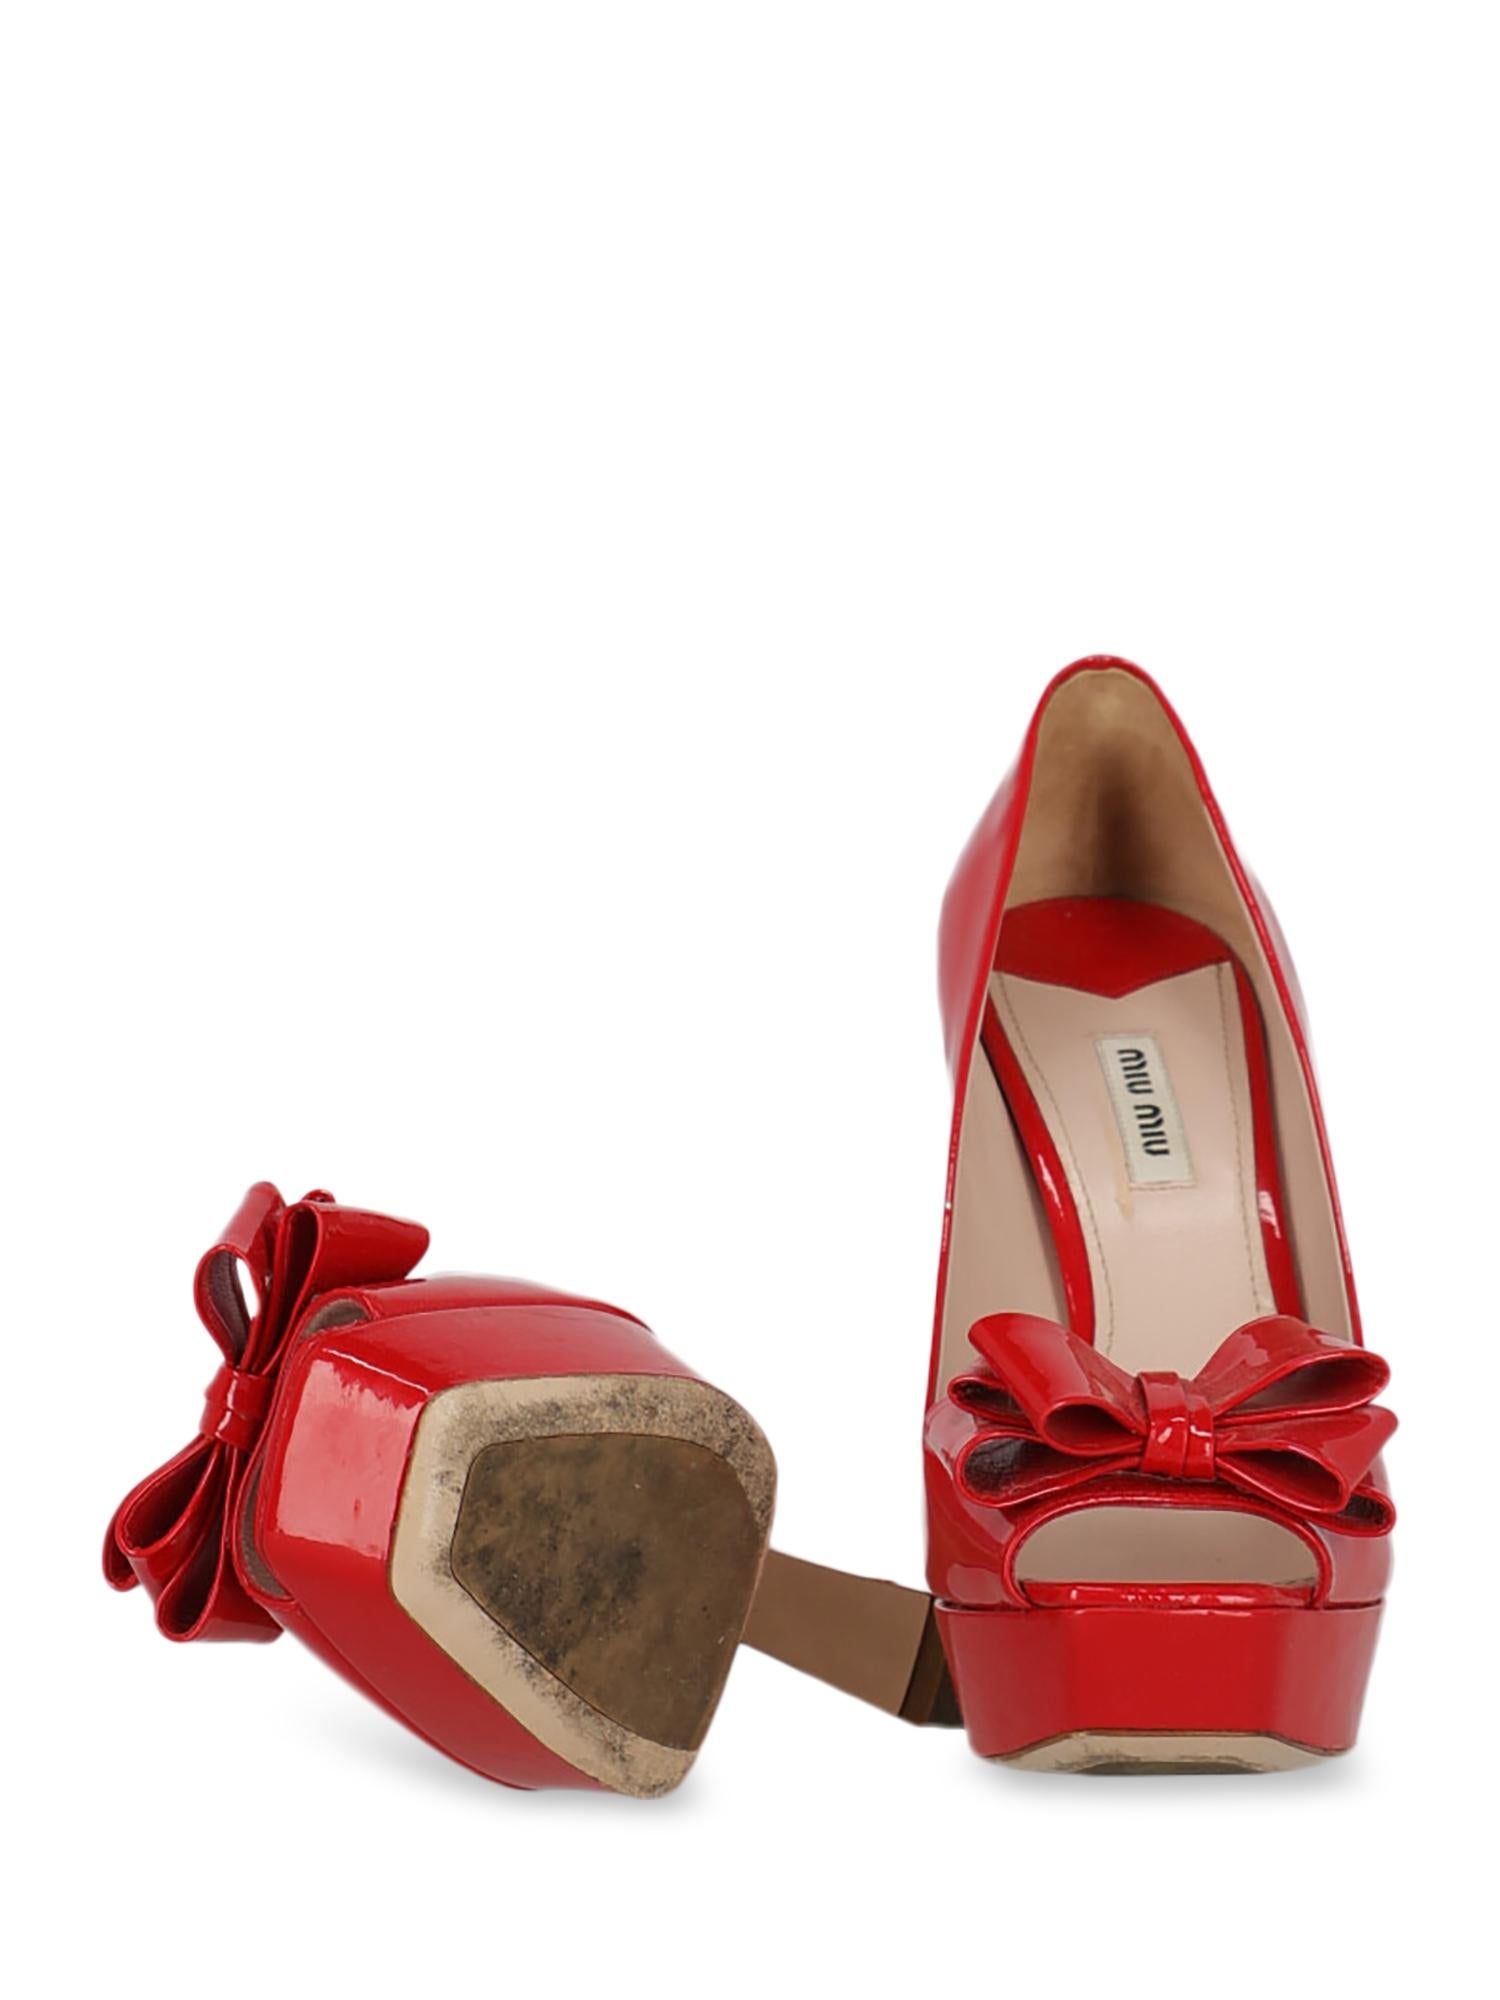 Miu Miu Woman Pumps Red Leather IT 39.5 For Sale 1